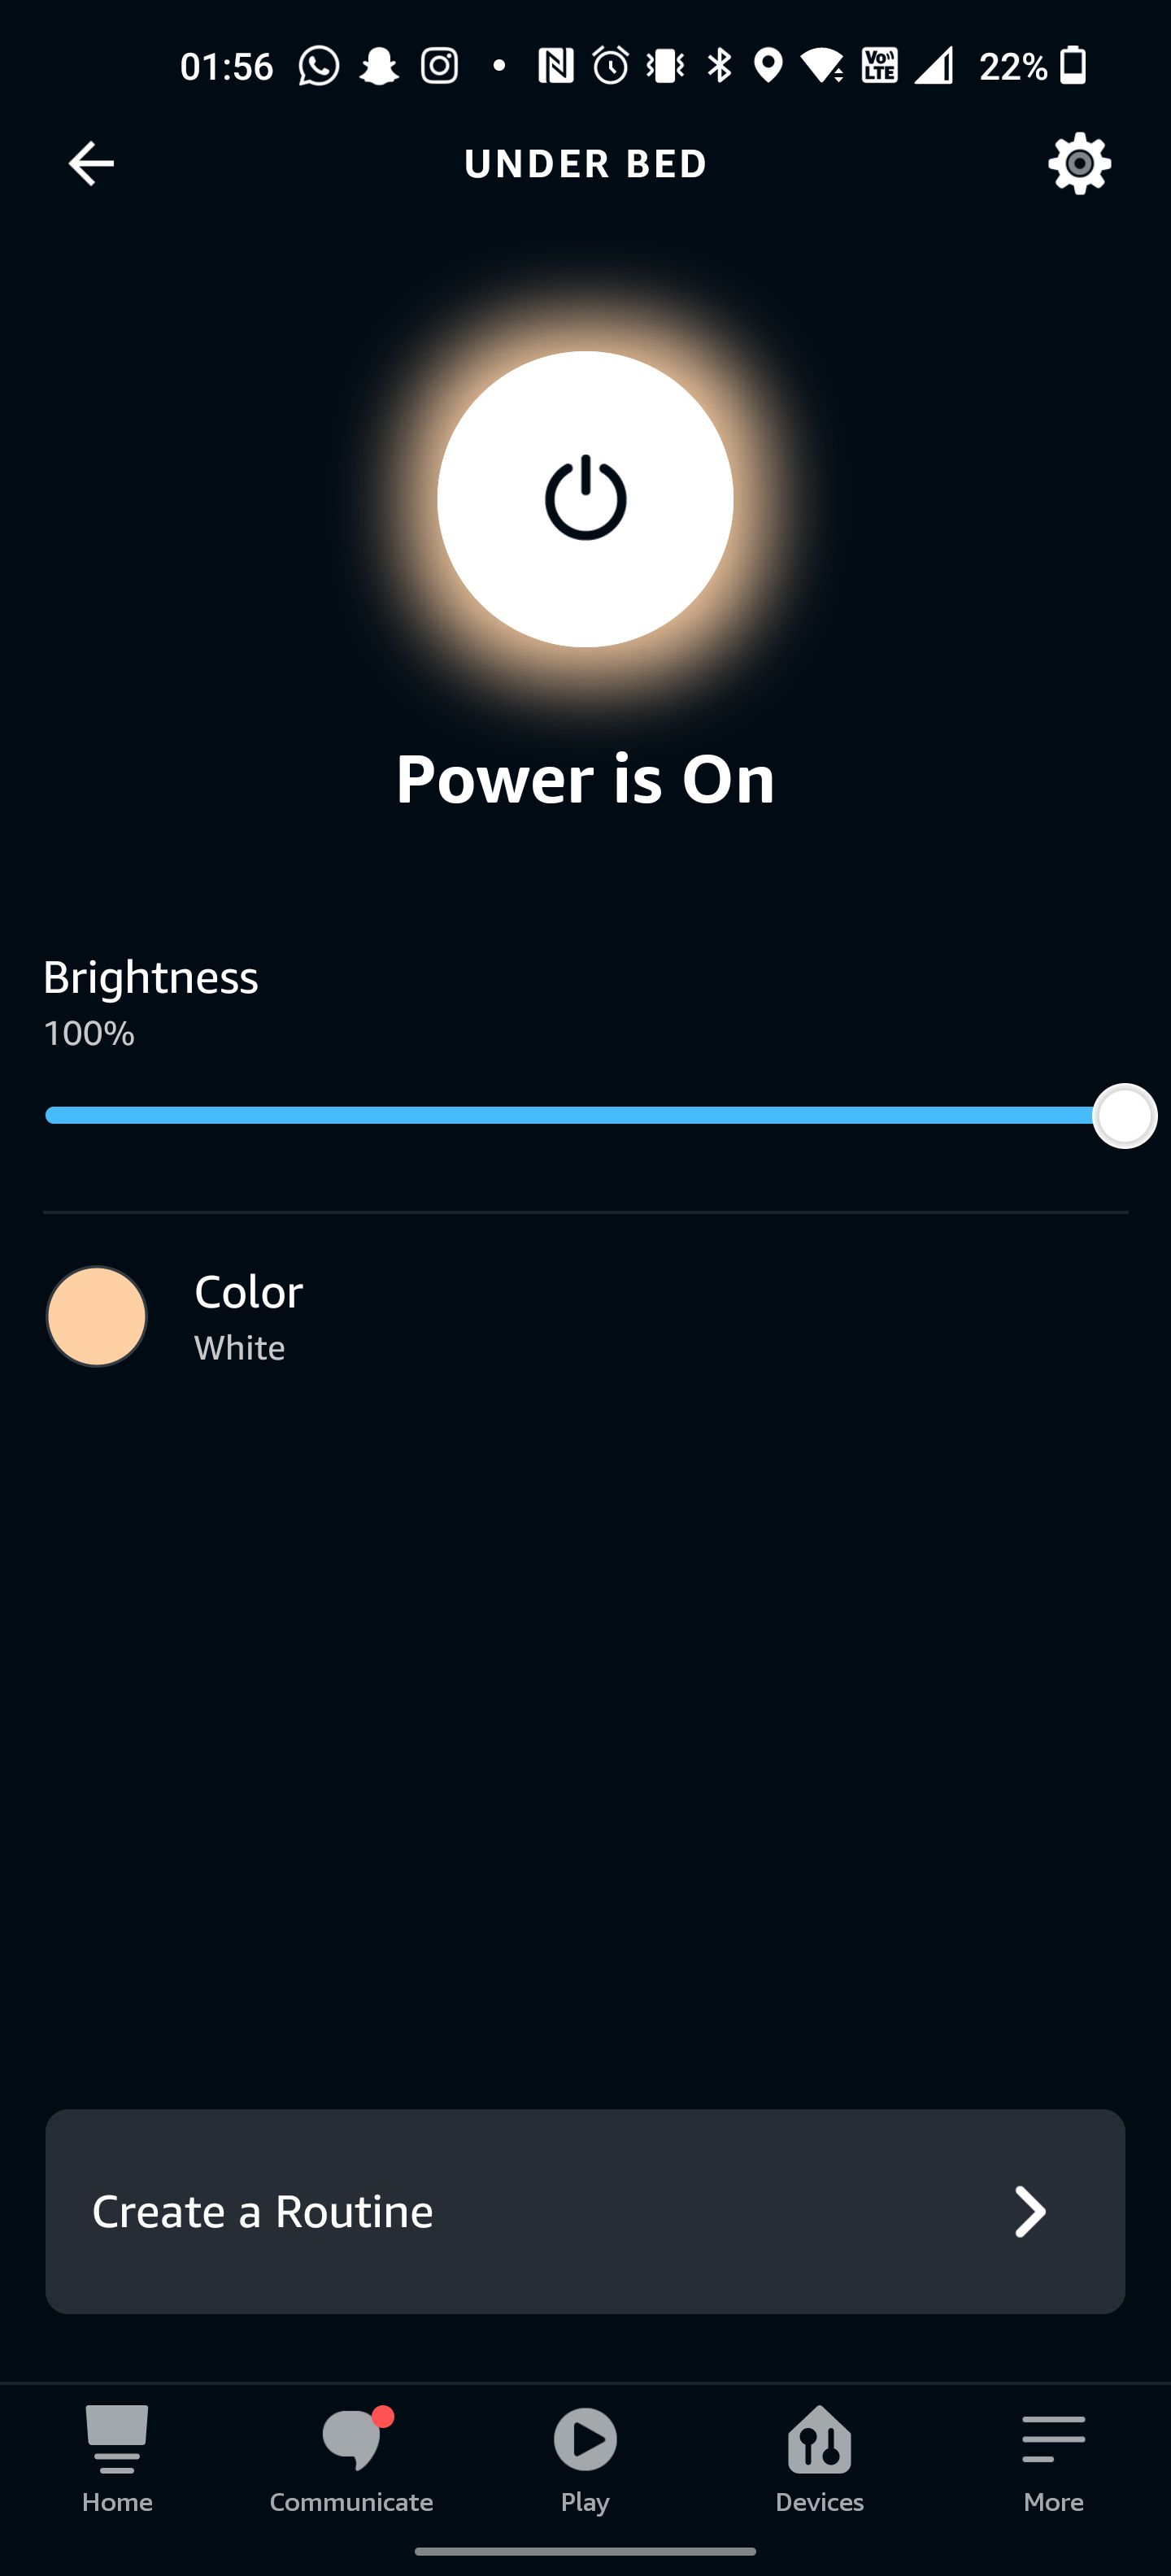 The Alexa app showing the smart bulb is on after being power cycled.